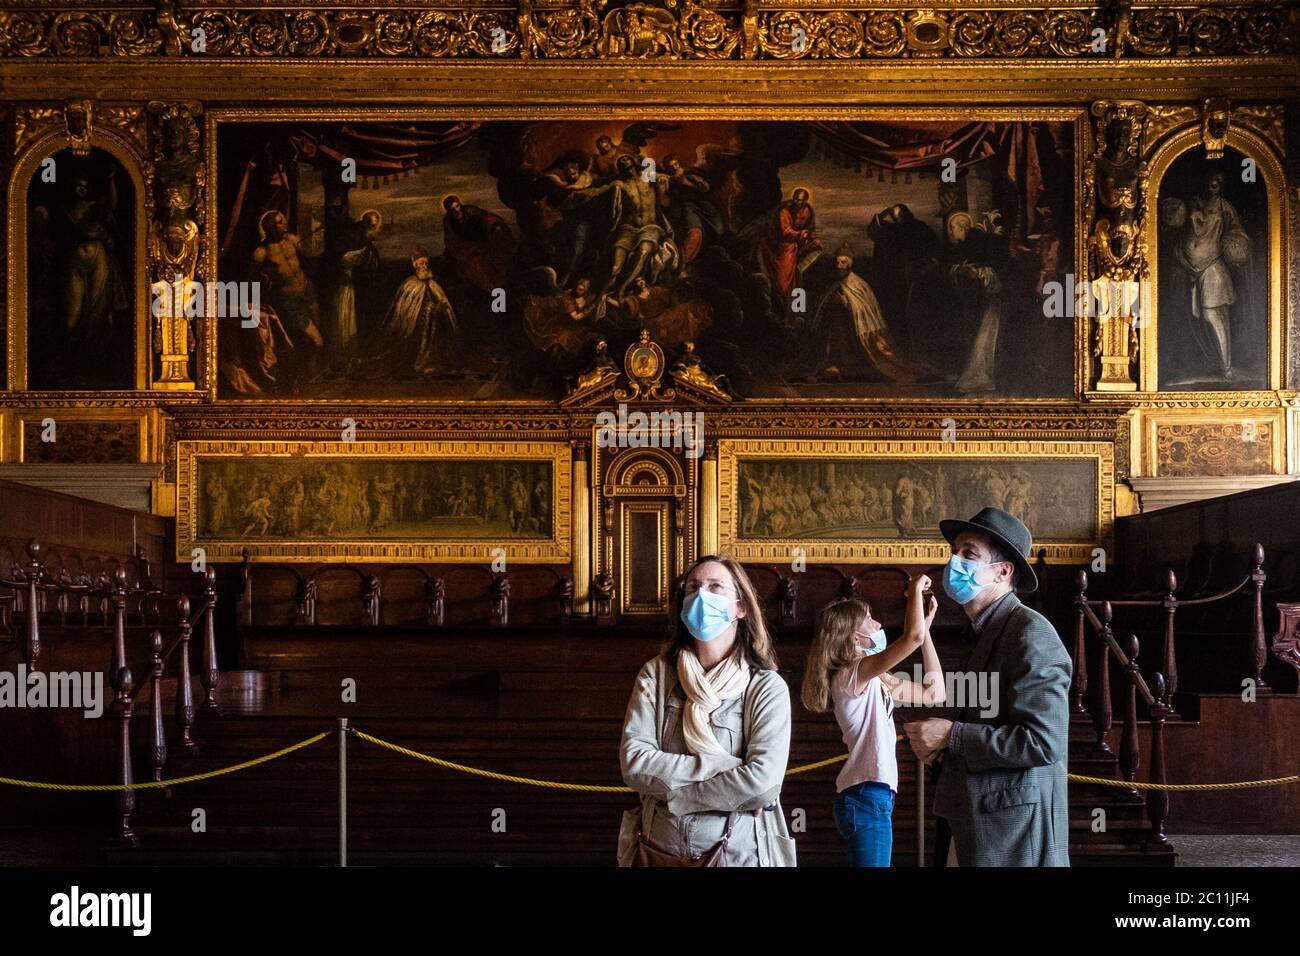 VENICE, ITALY - JUNE 13, 2020: Tourists visit the Ducale Palace Museum the day of the reopening after more than 3 months of closure due to the lockdown for Covid-19 on June 13, 2020 in Venice, Italy. Credit: Awakening/Alamy Live News Stock Photo